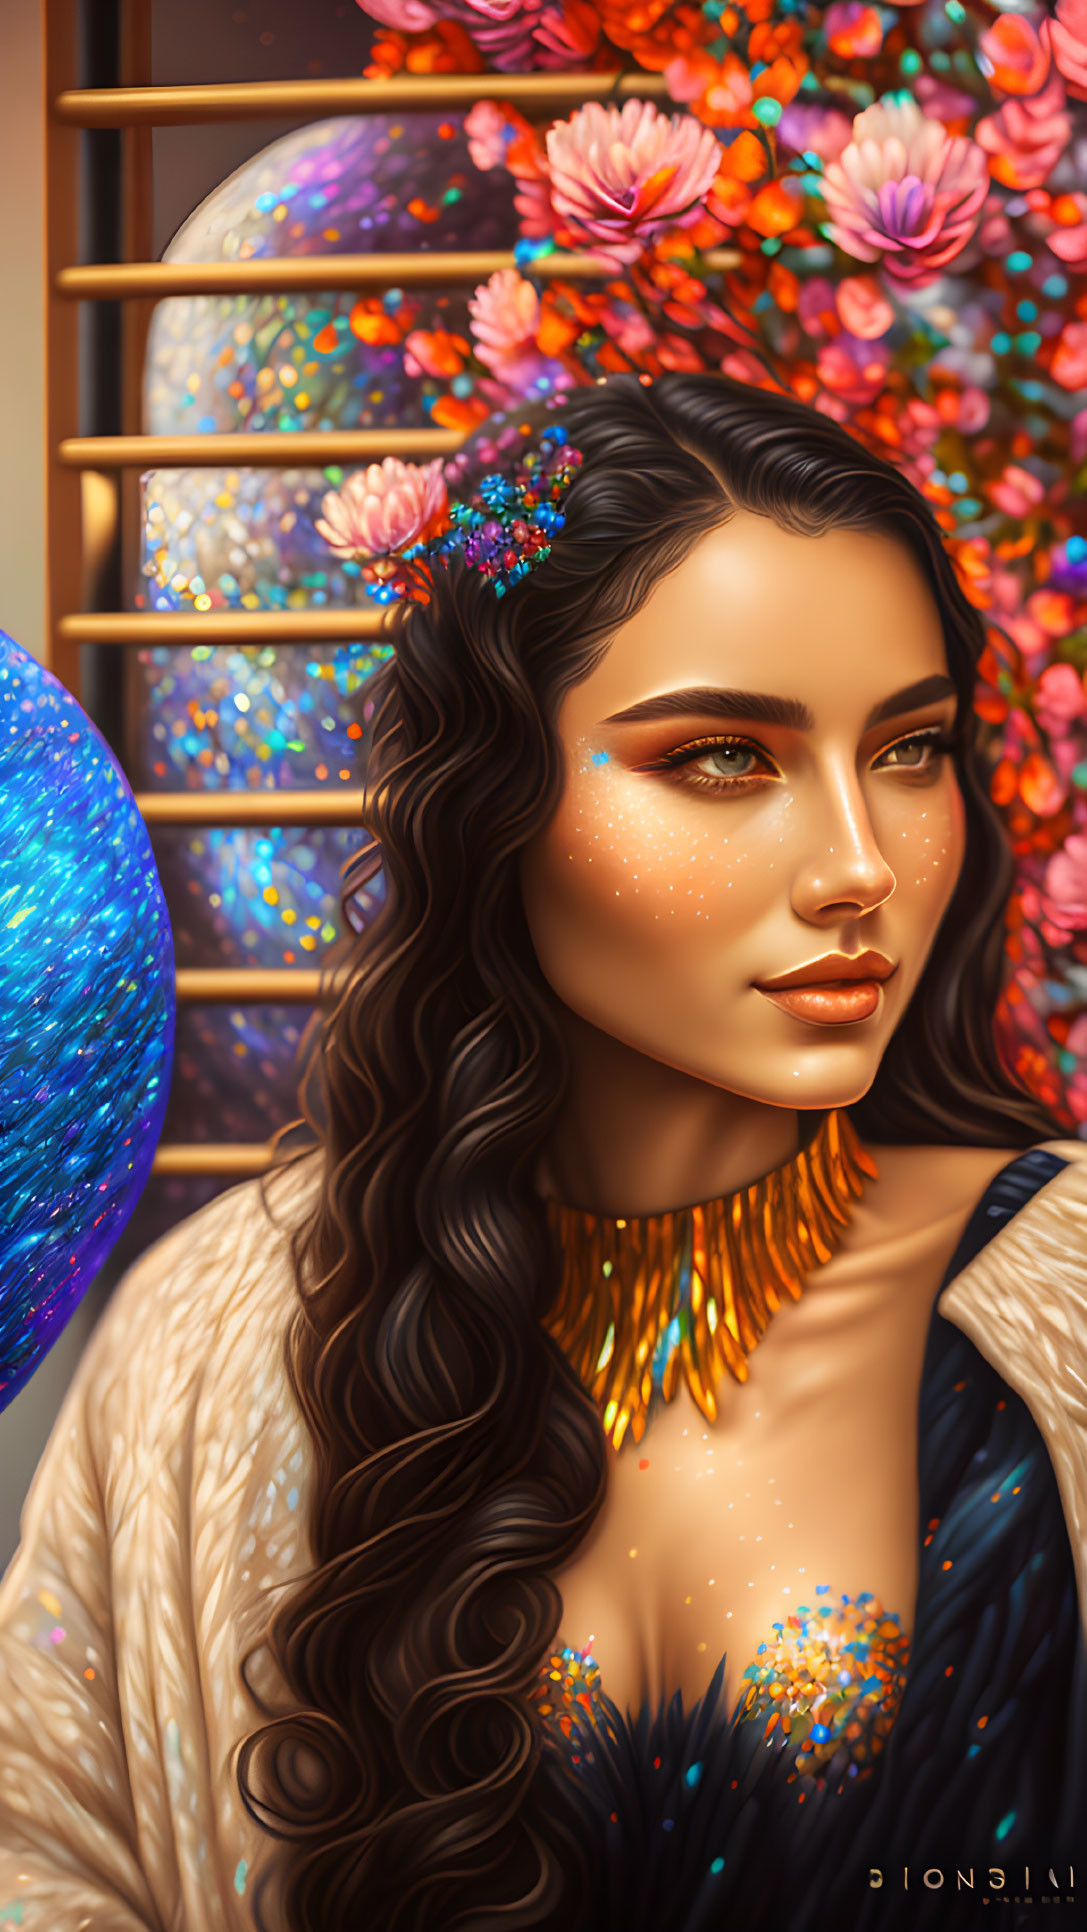 Vibrant digital portrait with glittering makeup and colorful flowers